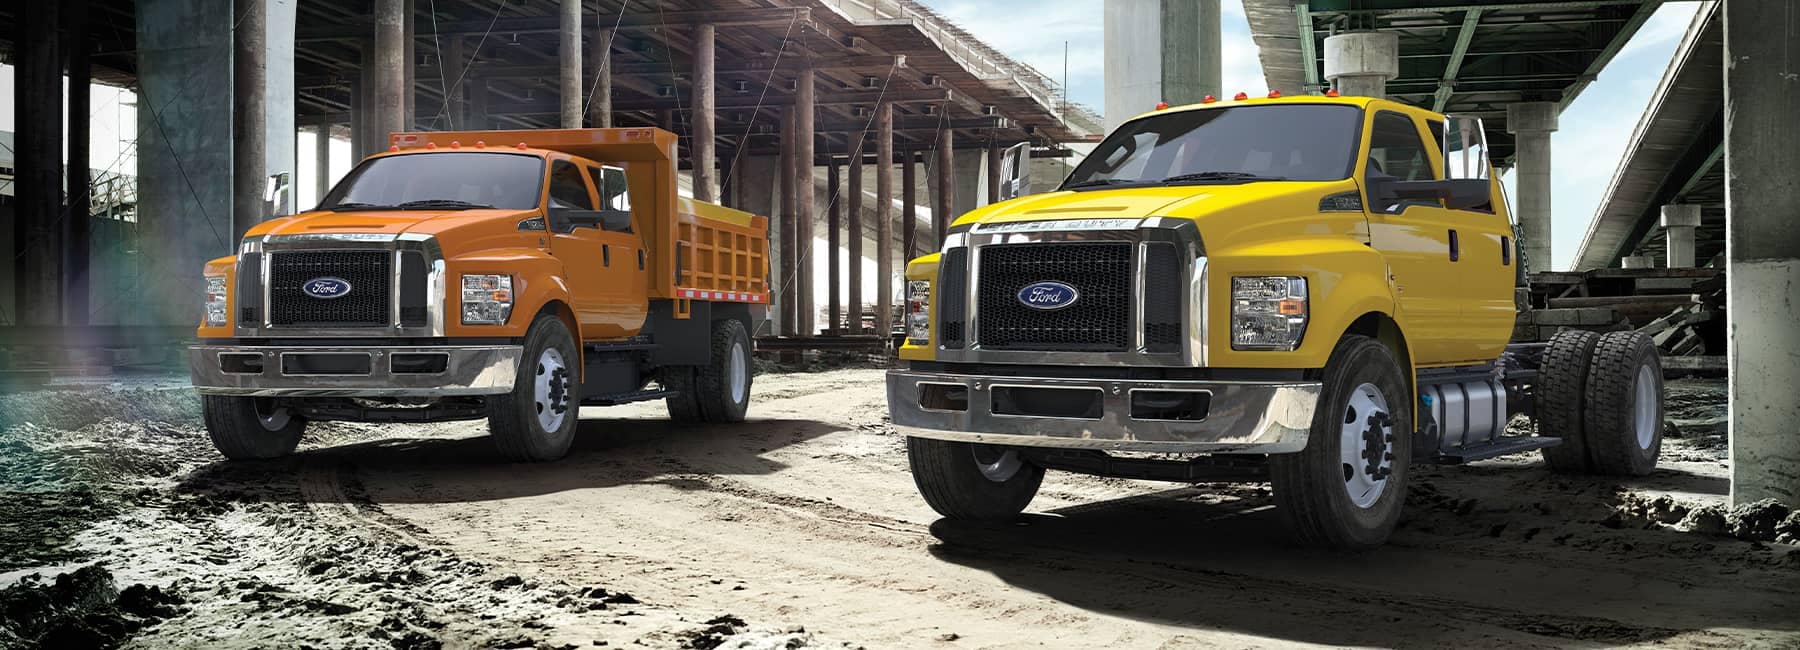 Ford Commercial trucks at a construction site